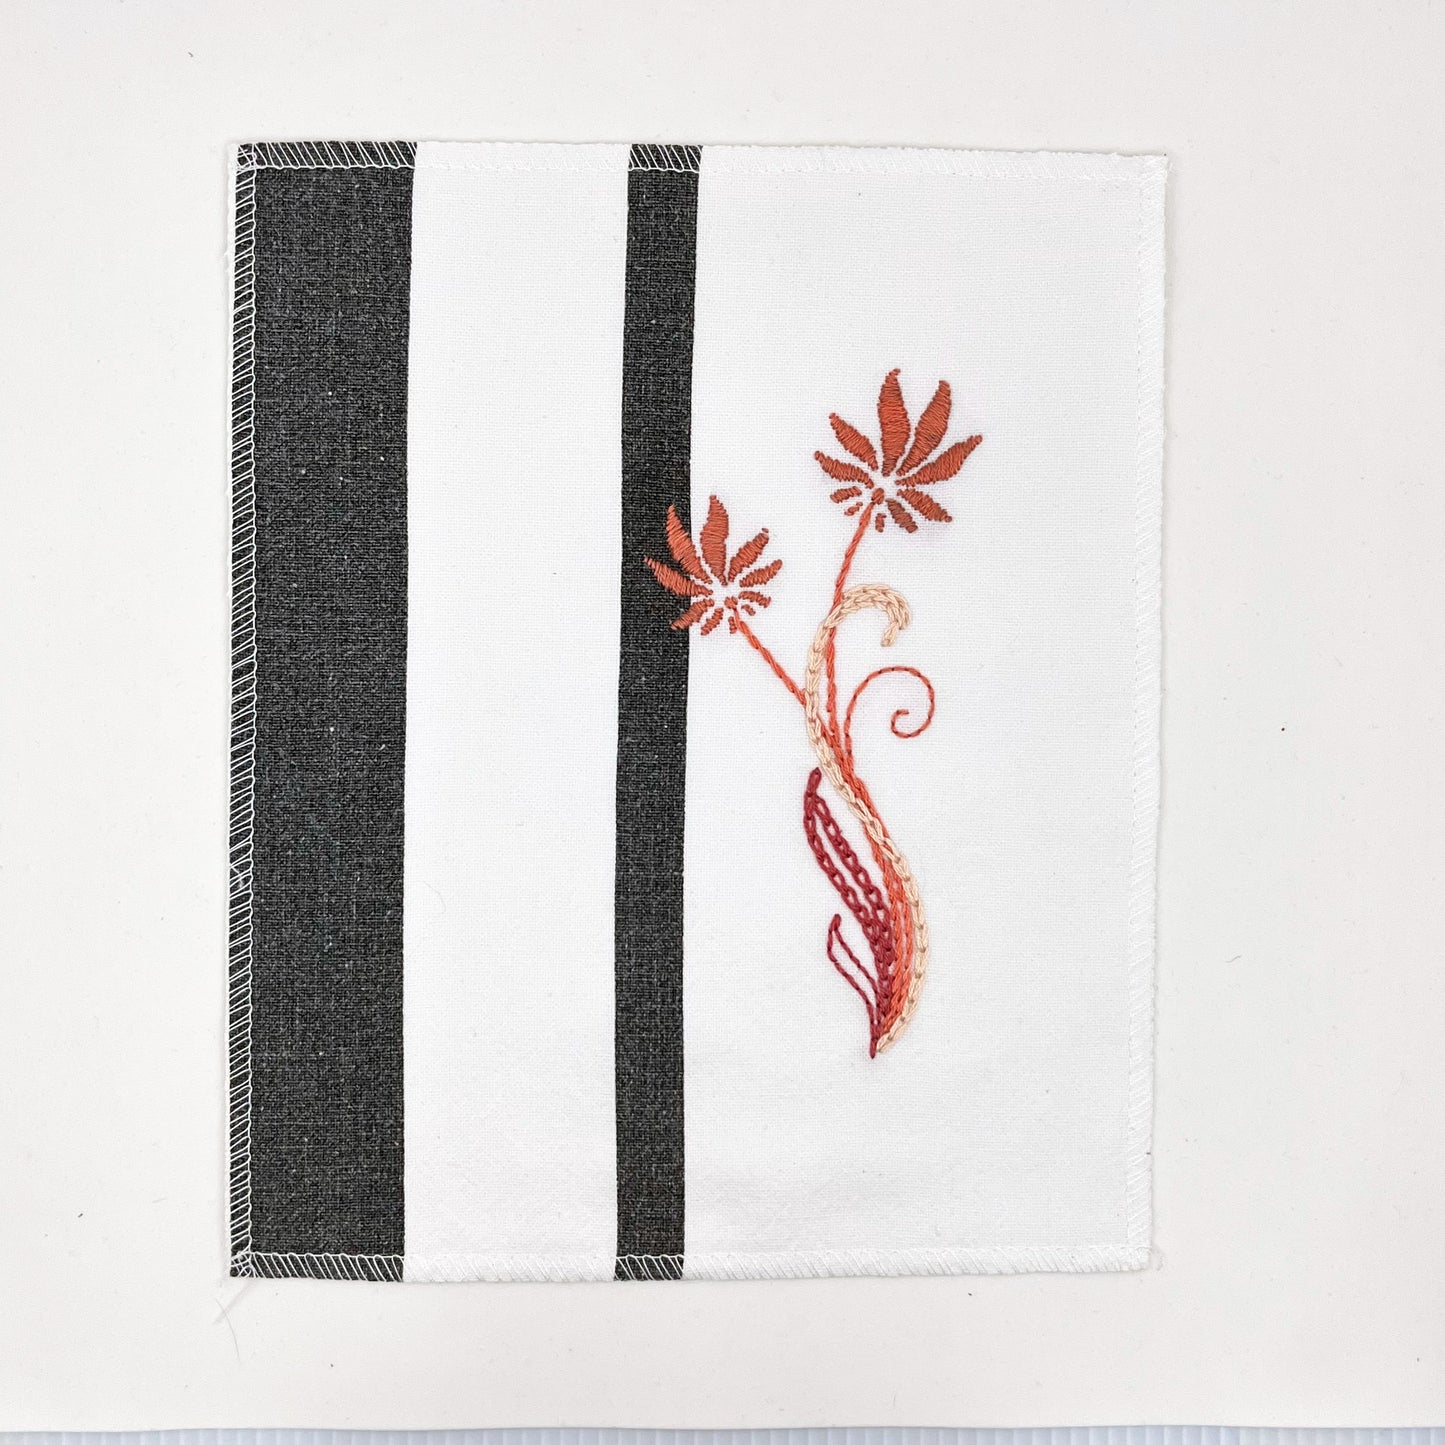 a fabric wall hanging made out of white fabric with black vertical stripes, hand stitched with flowers in shades of coral with long curvy stems in chainstitch, backstitch and stem stitch, on a white background